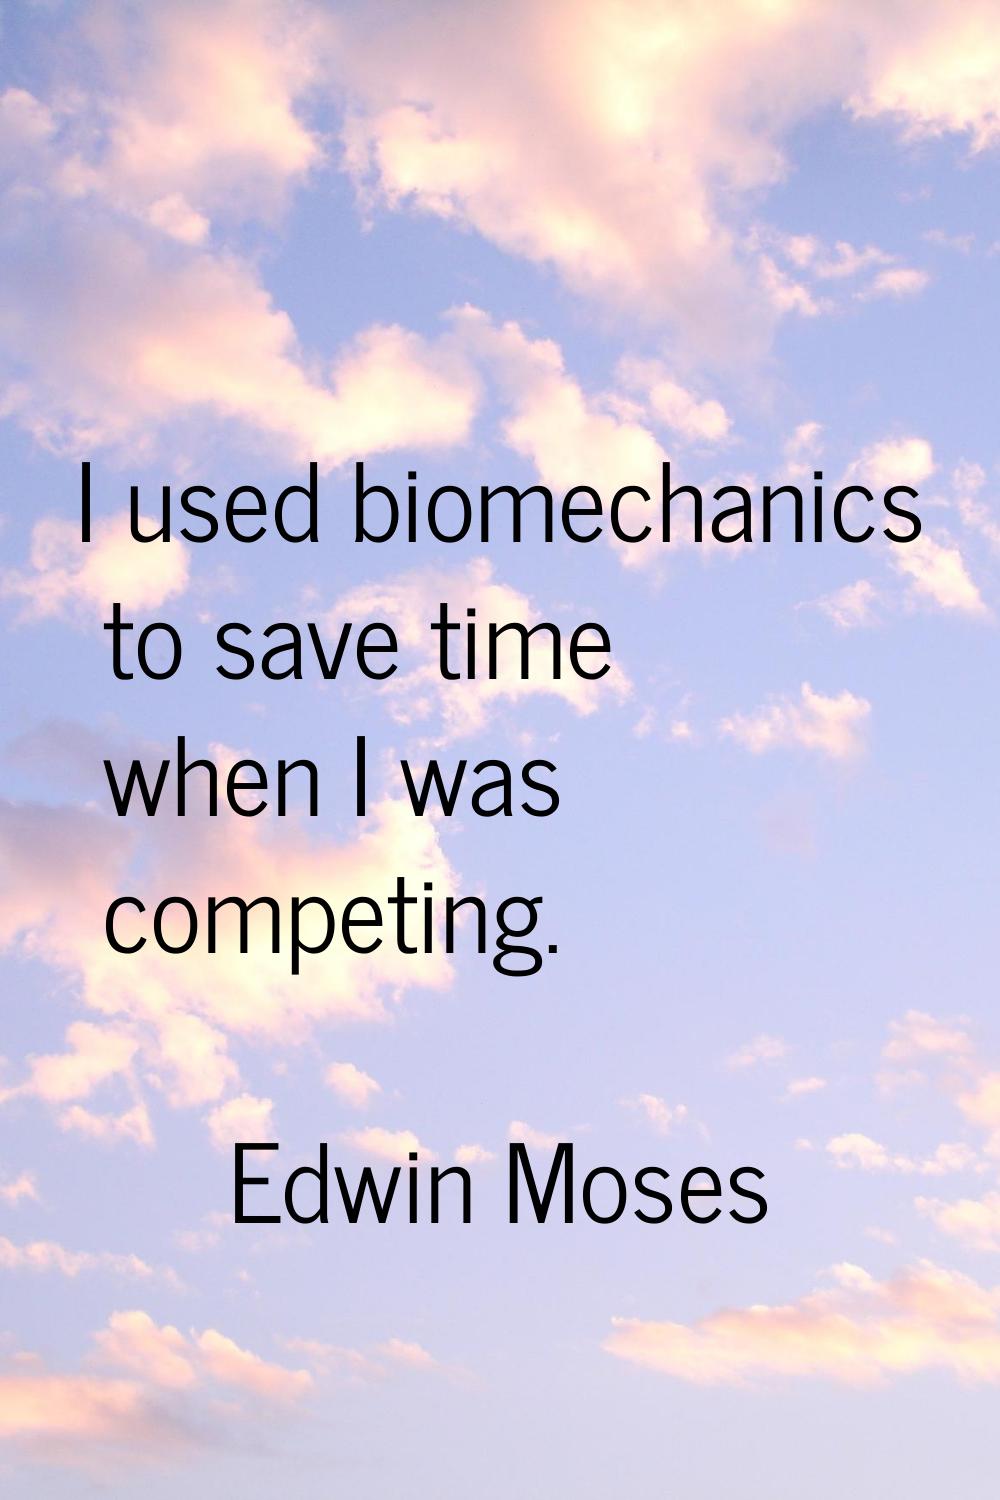 I used biomechanics to save time when I was competing.